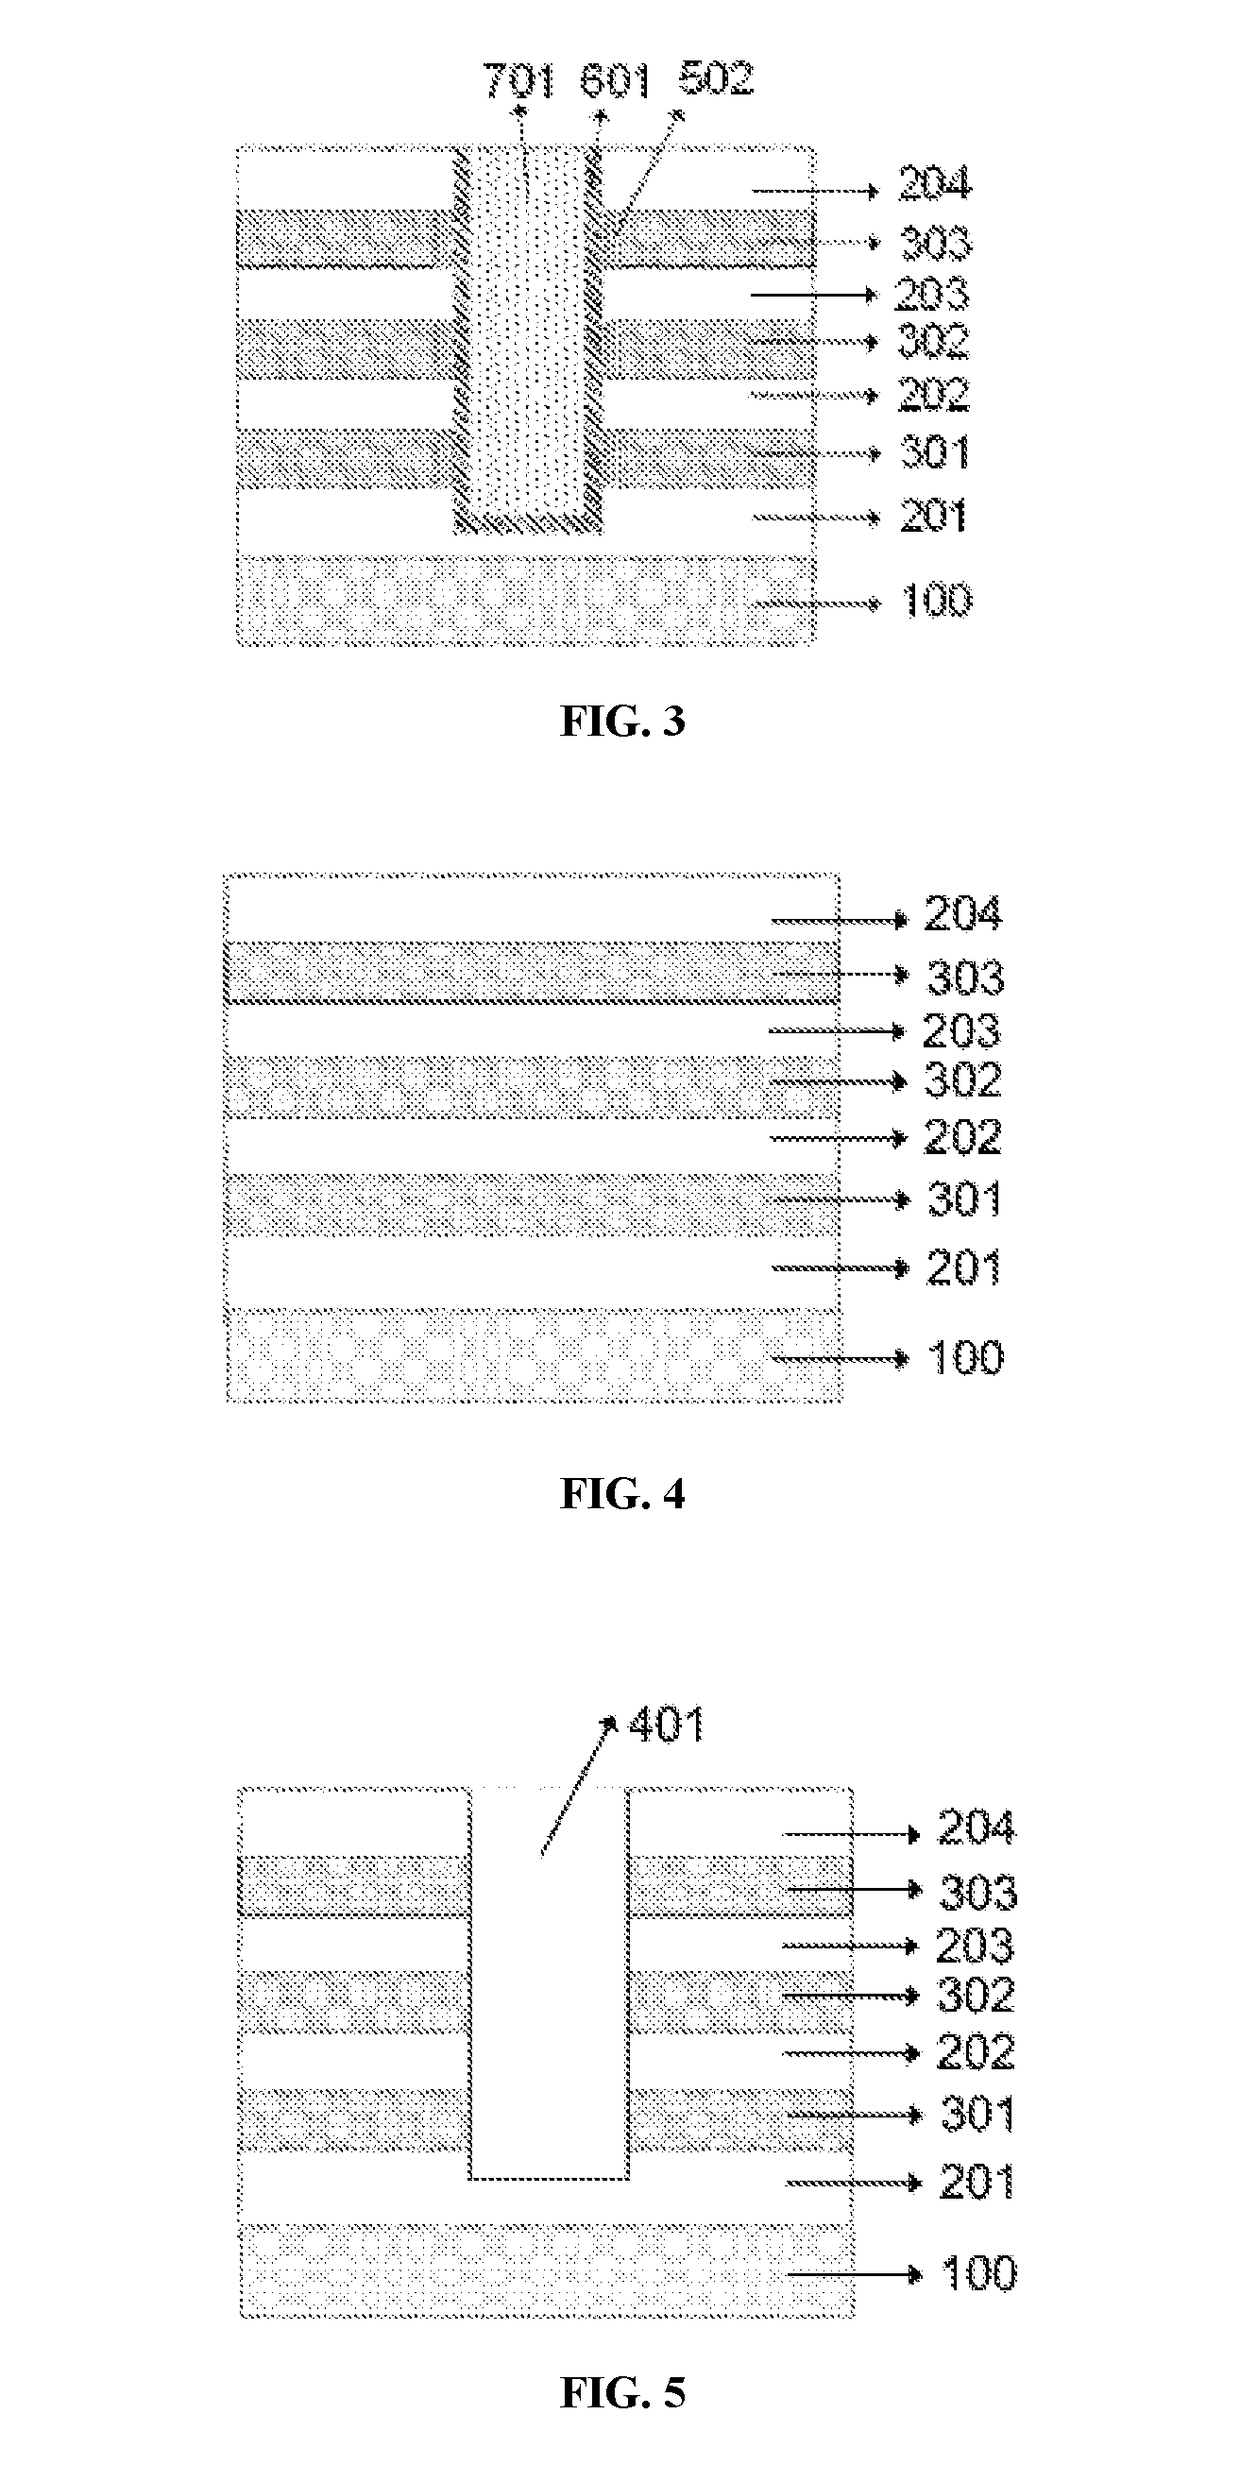 Self-gating resistive storage device and method for fabrication thereof